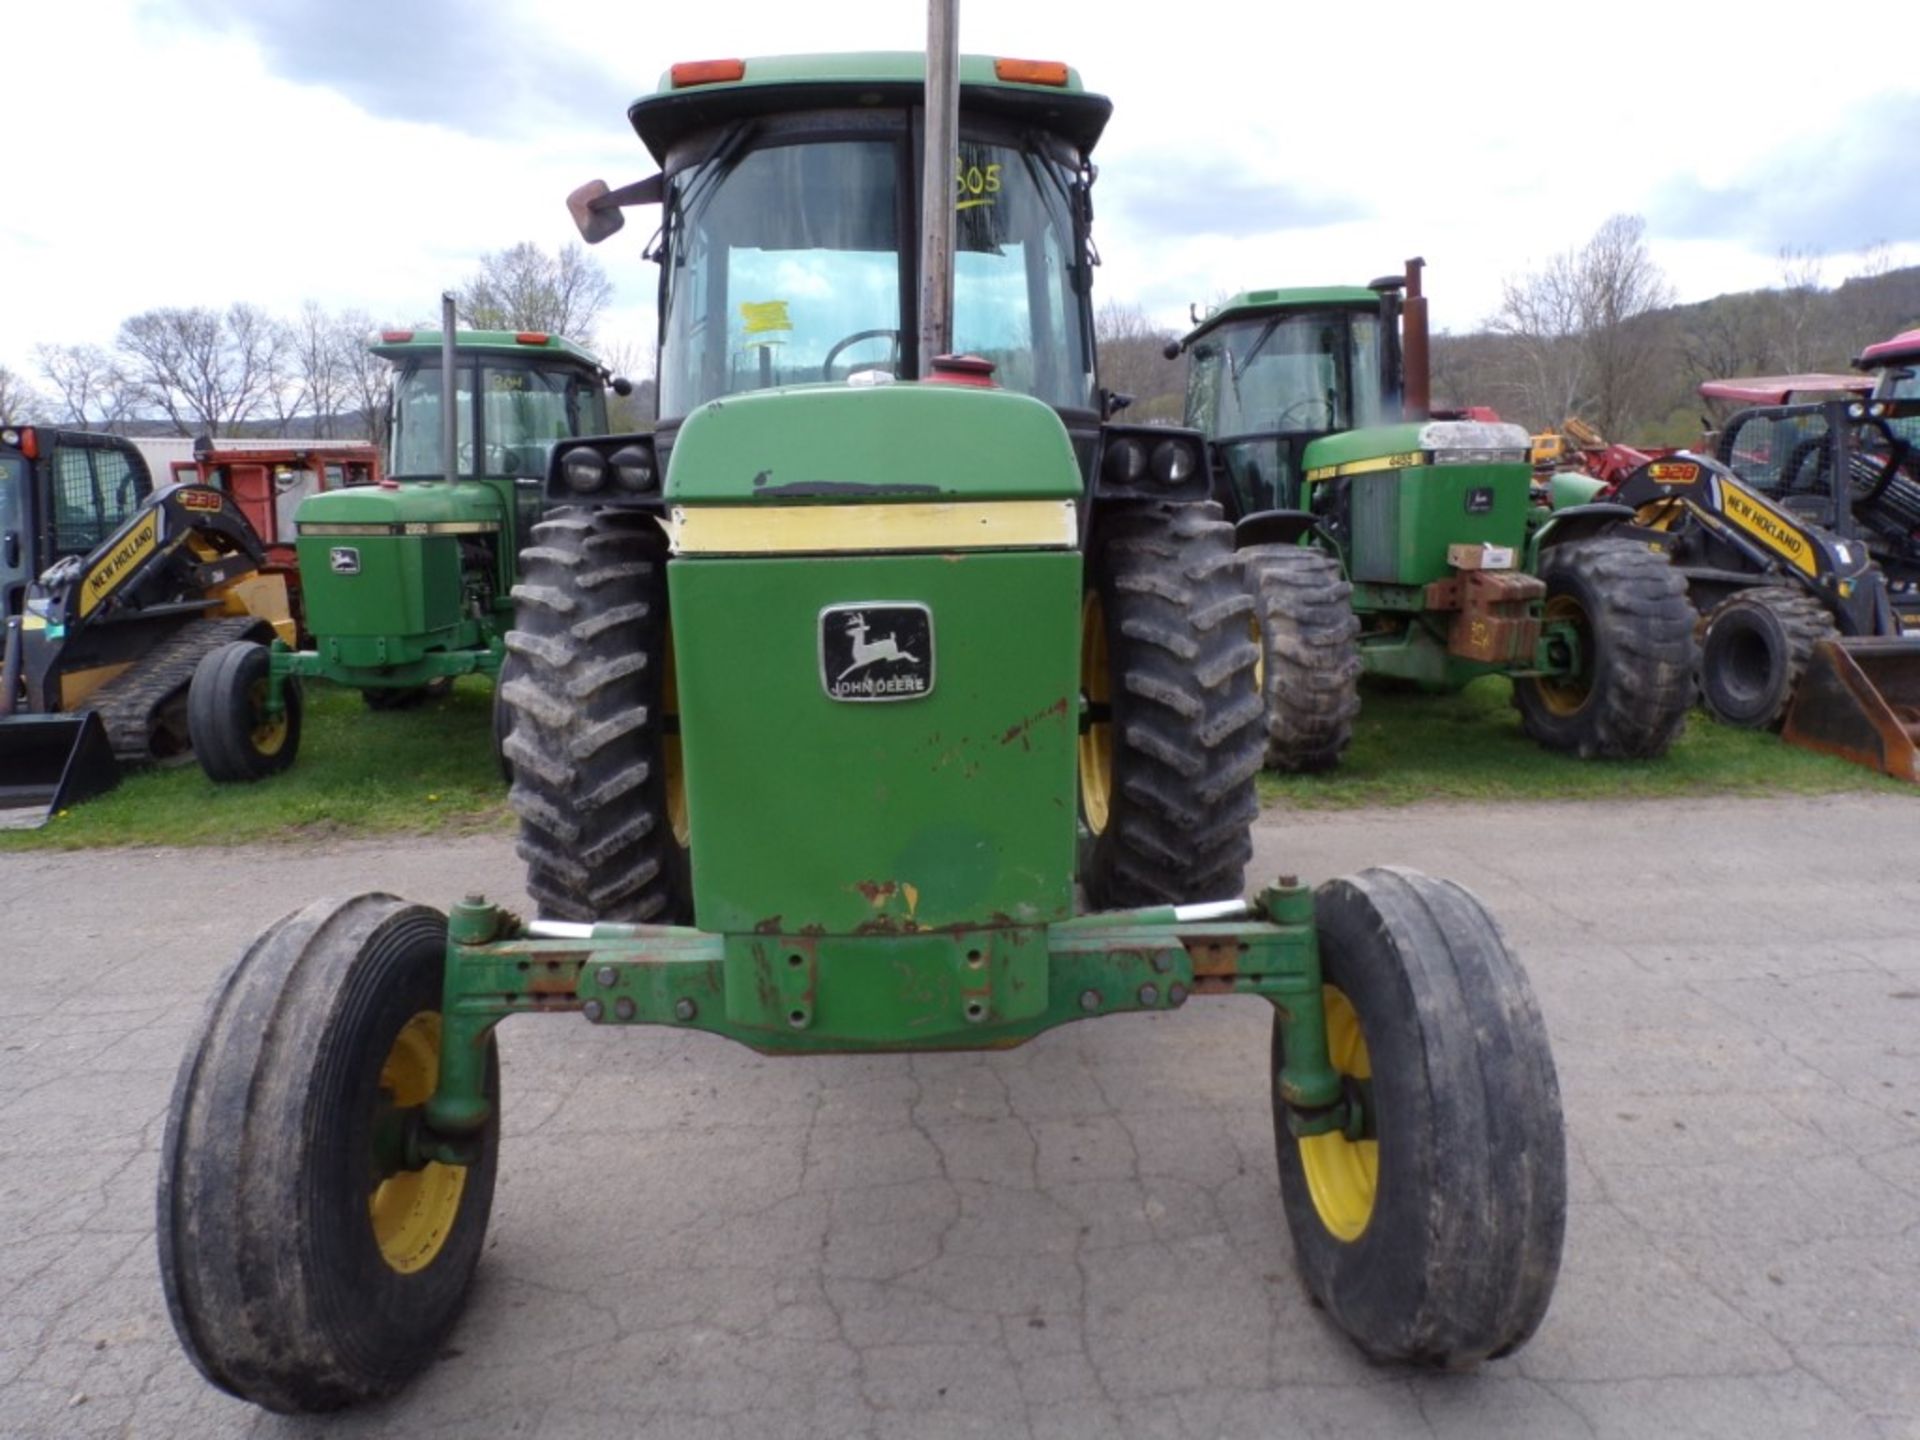 John Deere 2940 Tractor with Sound Guard Cab, Excellent Firestone 8.4-34 Rear Tires, (2) Rear - Image 2 of 5